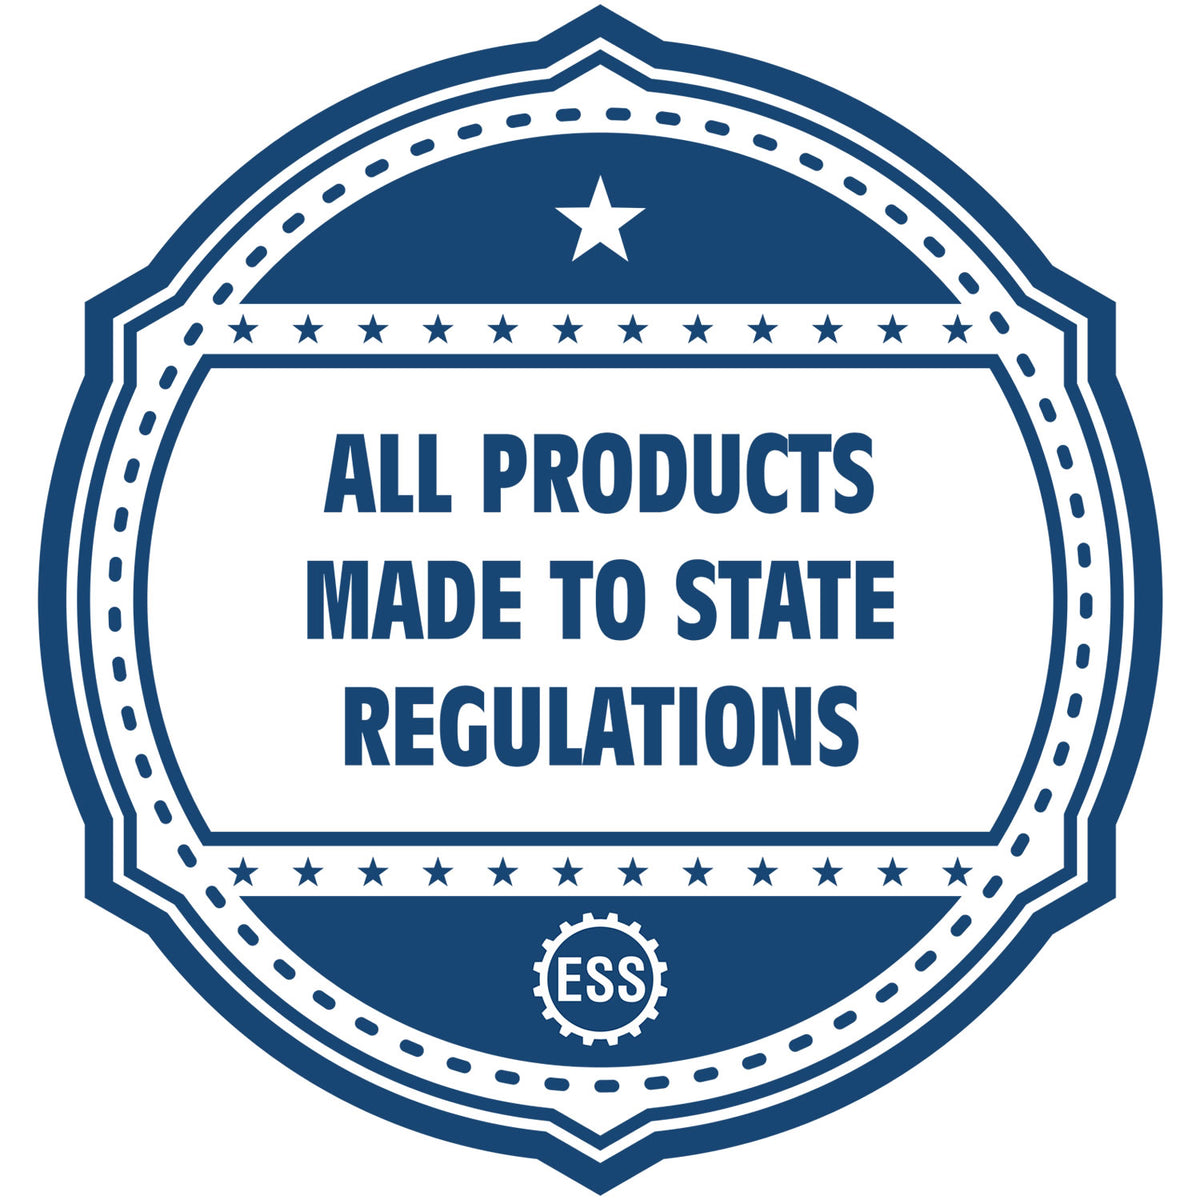 An icon or badge element for the Premium MaxLight Pre-Inked Georgia Landscape Architectural Stamp showing that this product is made in compliance with state regulations.